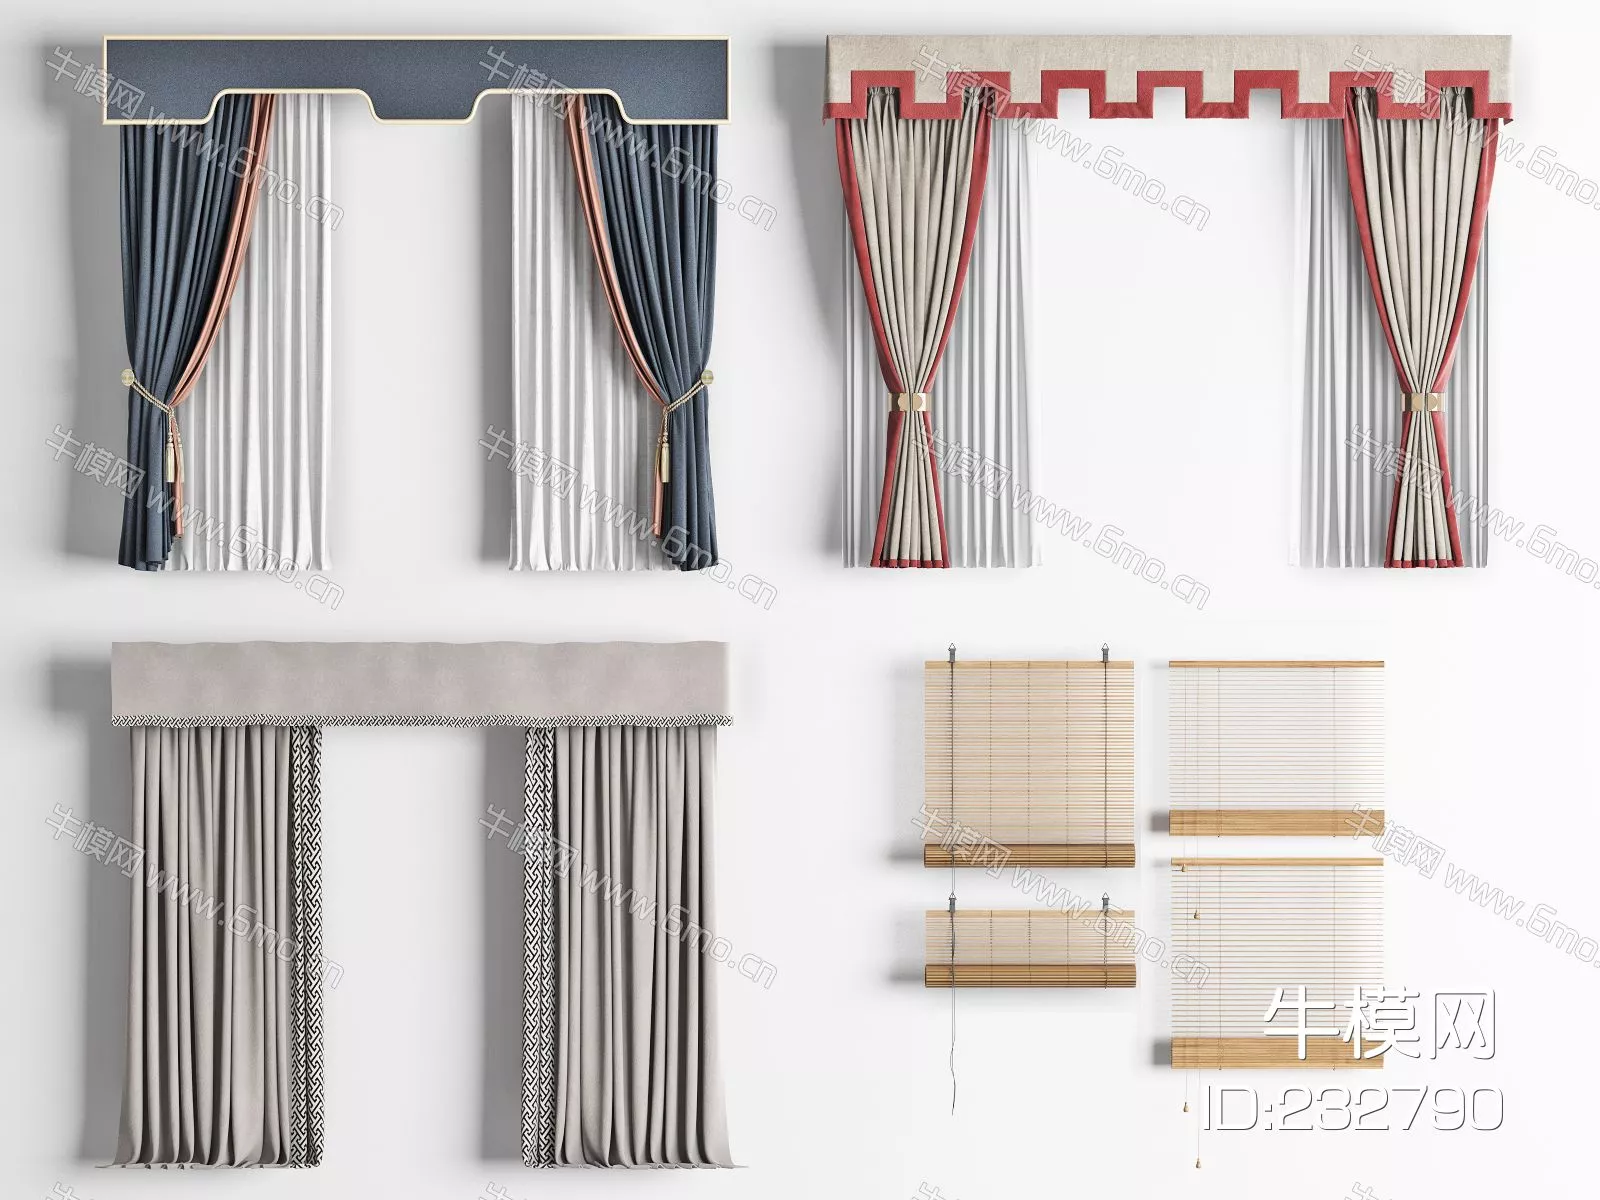 CHINESE CURTAIN - SKETCHUP 3D MODEL - VRAY - 232790